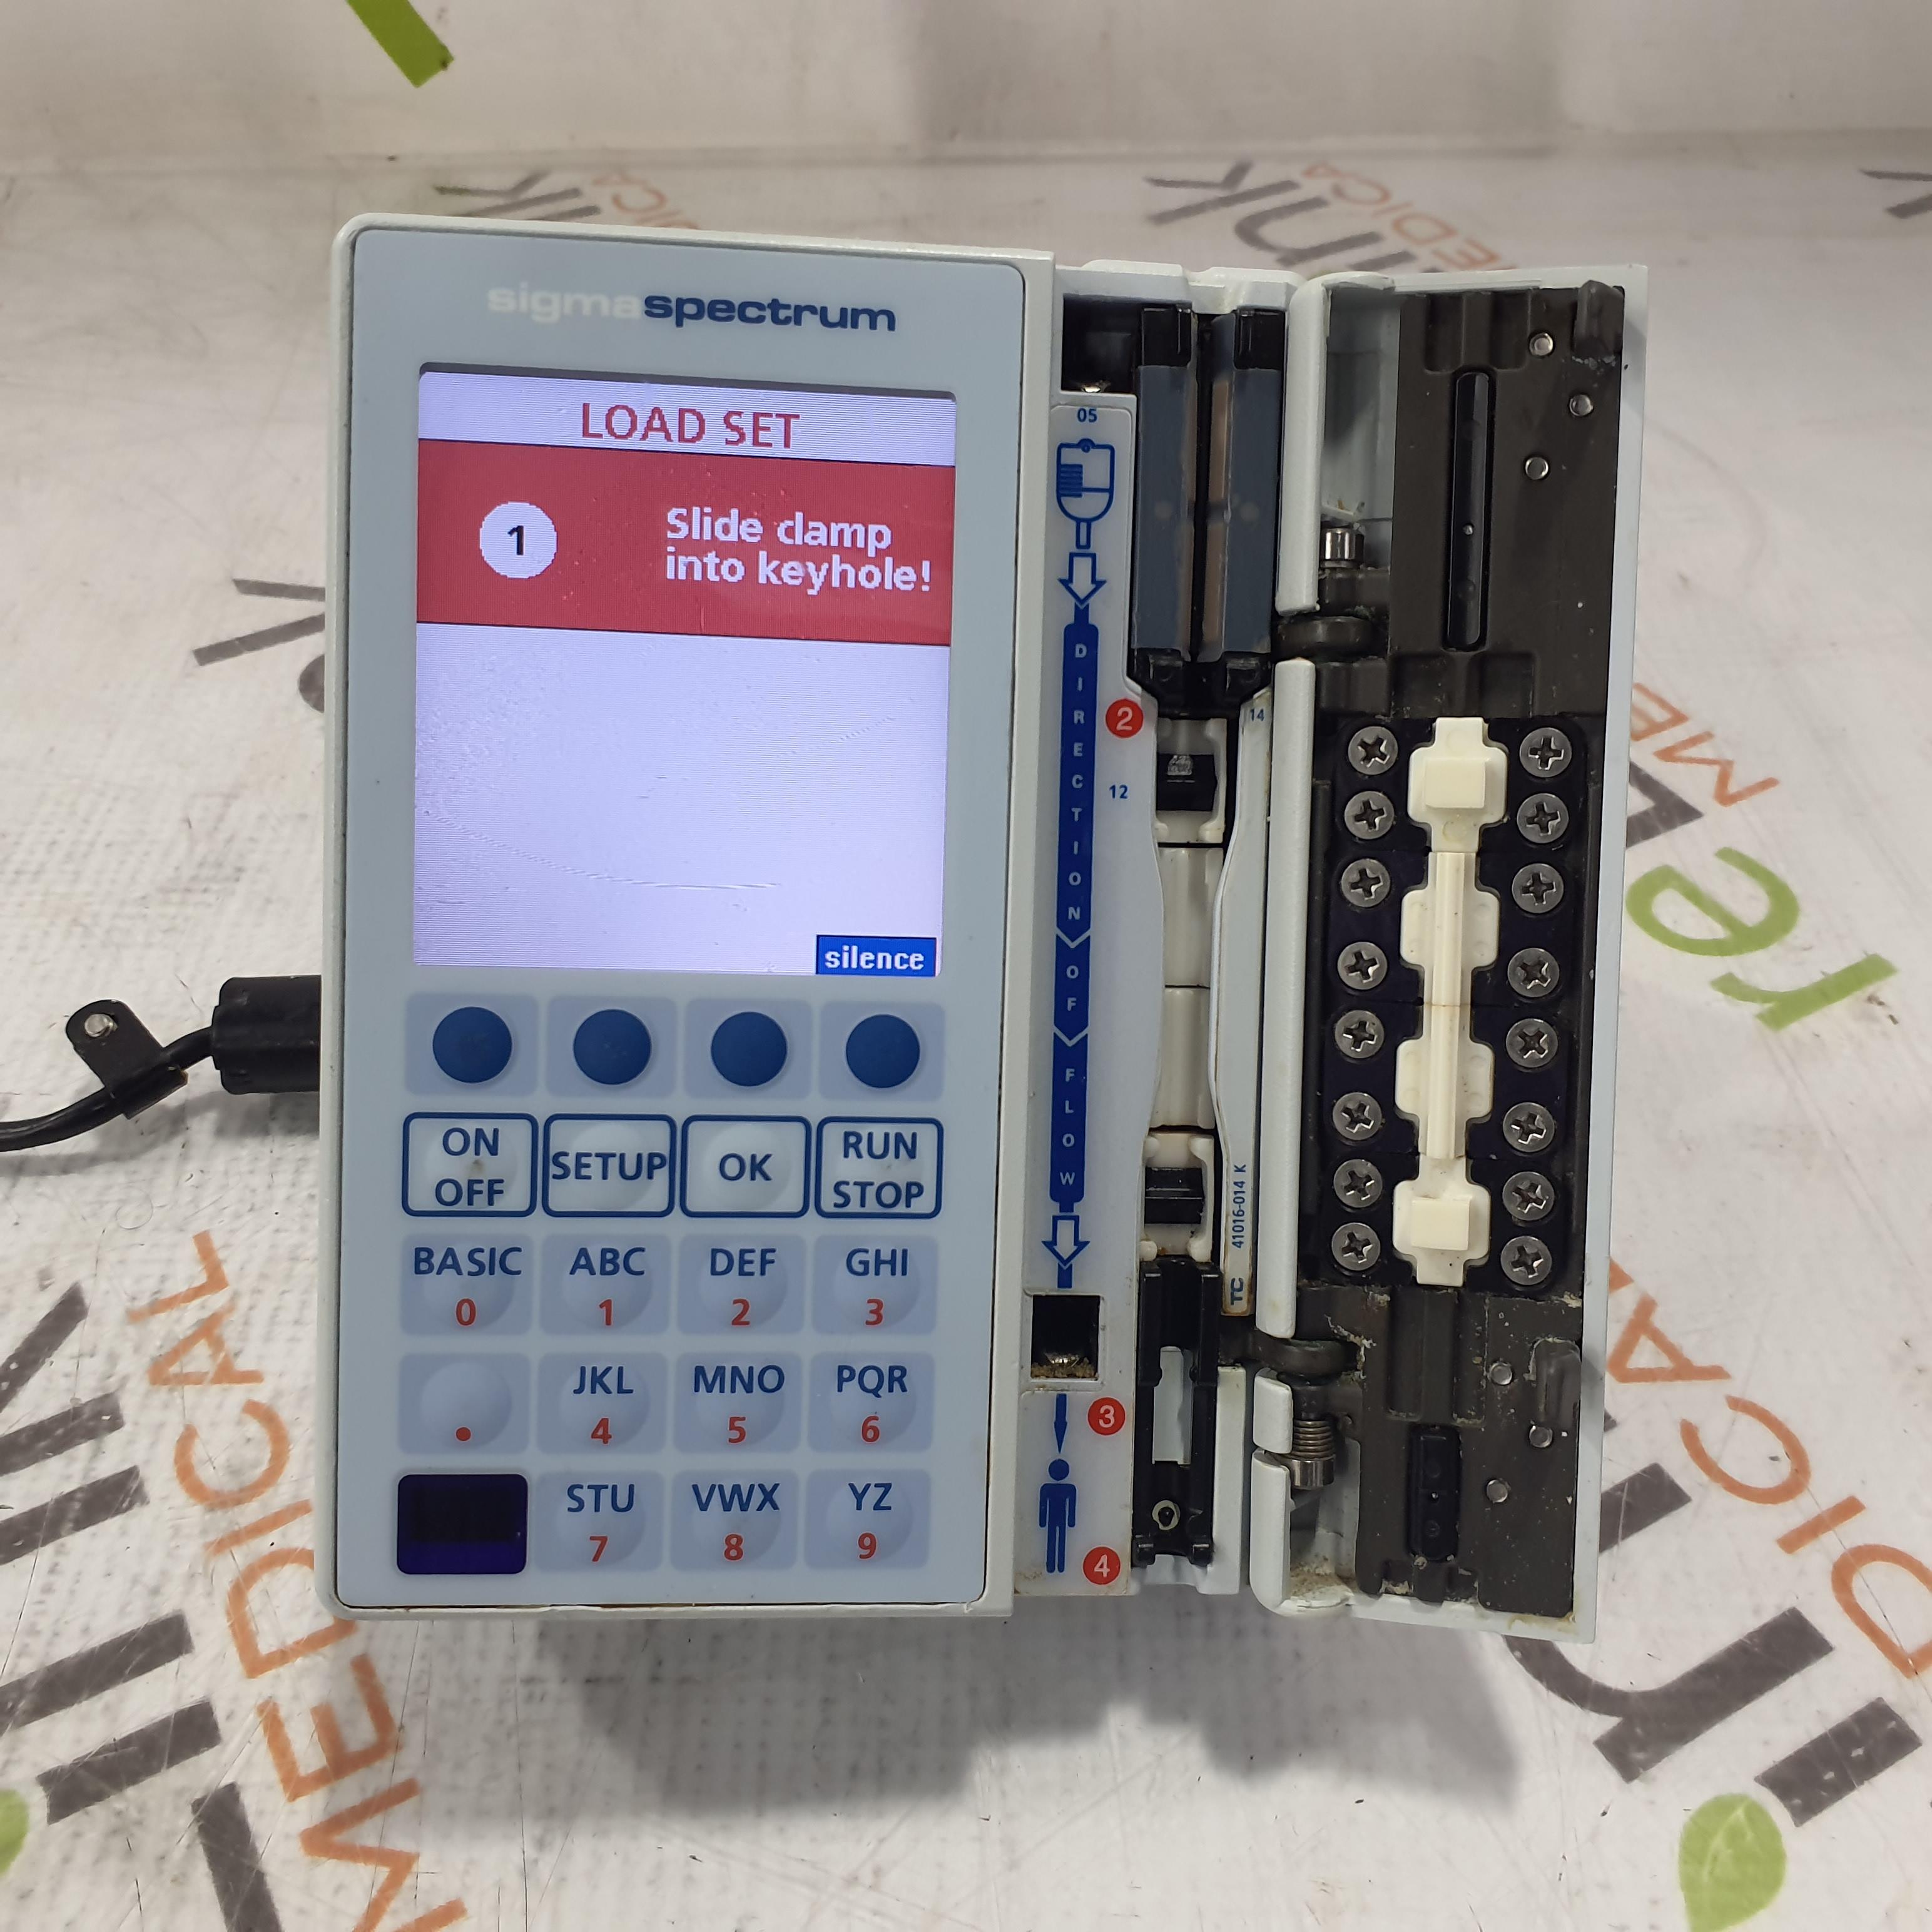 Baxter Sigma Spectrum 6.05.13 without Battery Infusion Pump - 379090